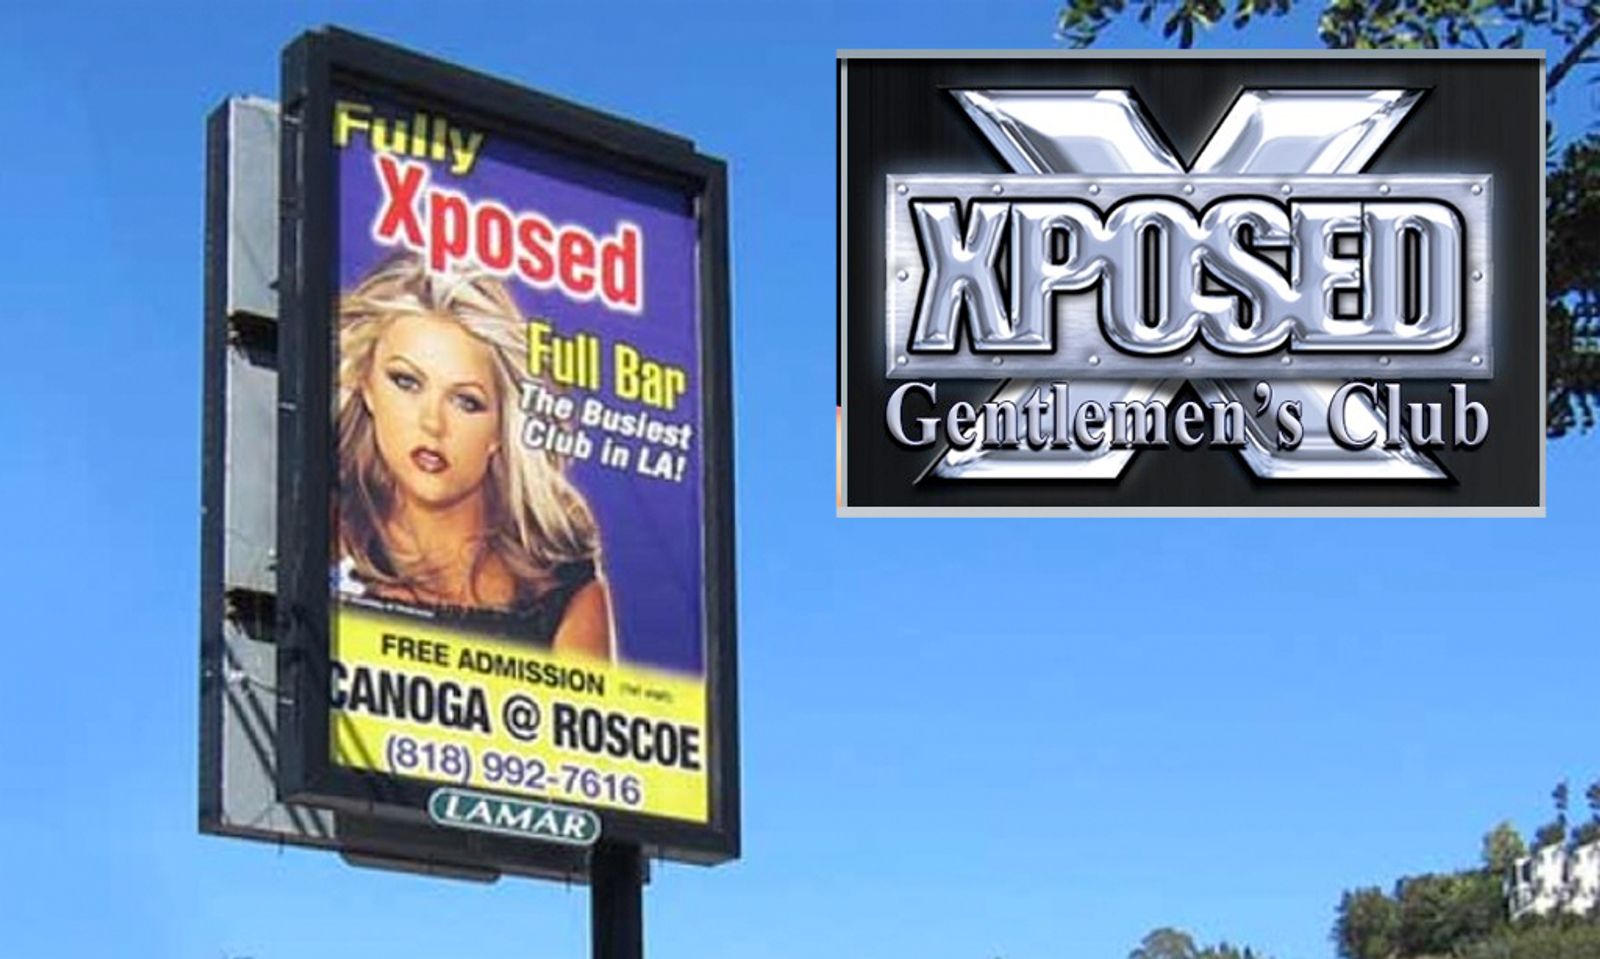 Xposed Gentlemen's Club Is Site of Attempted Robbery